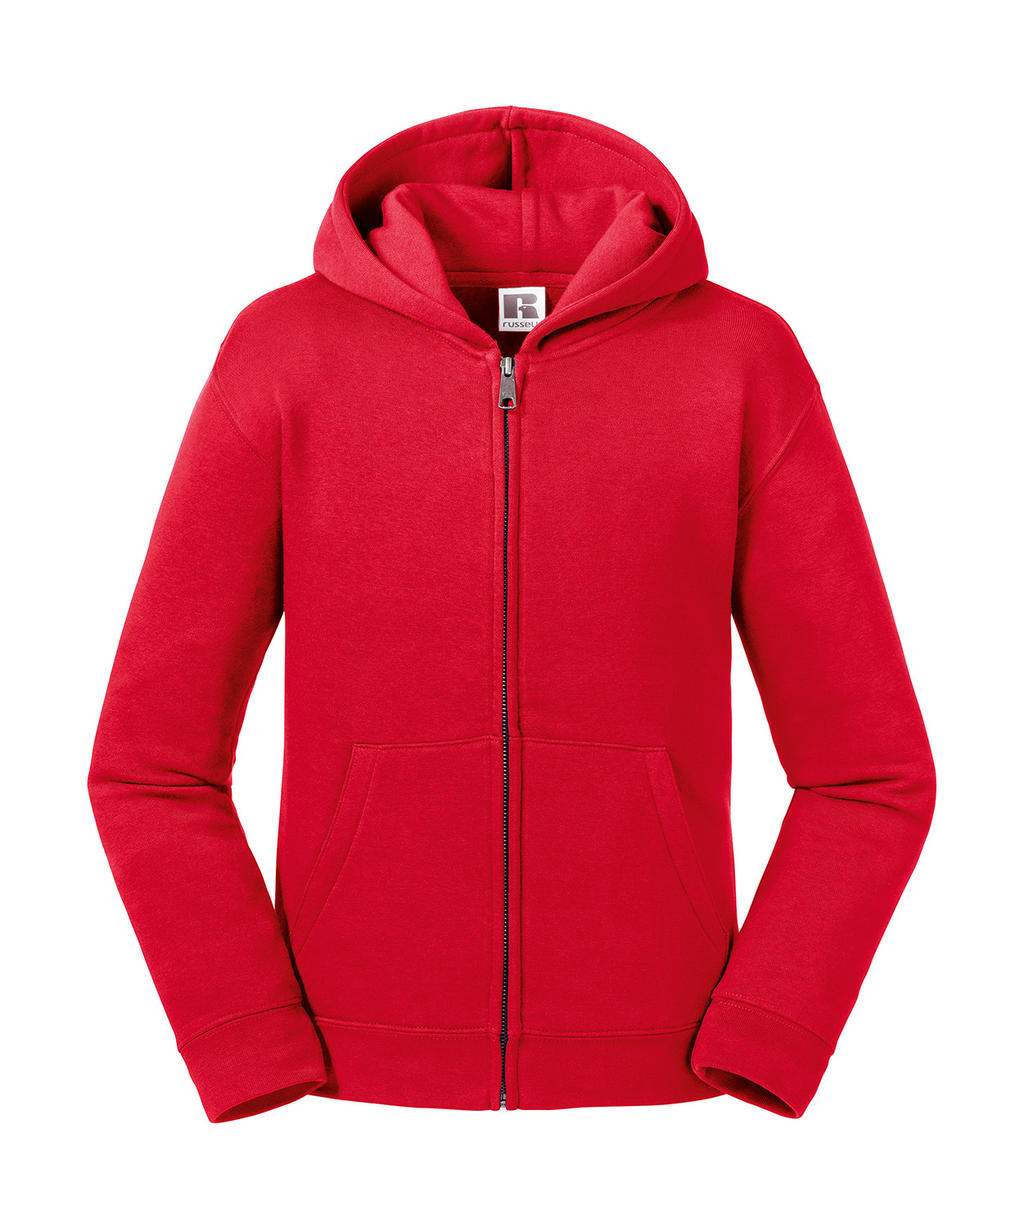  Kids Authentic Zipped Hood Sweat in Farbe Classic Red